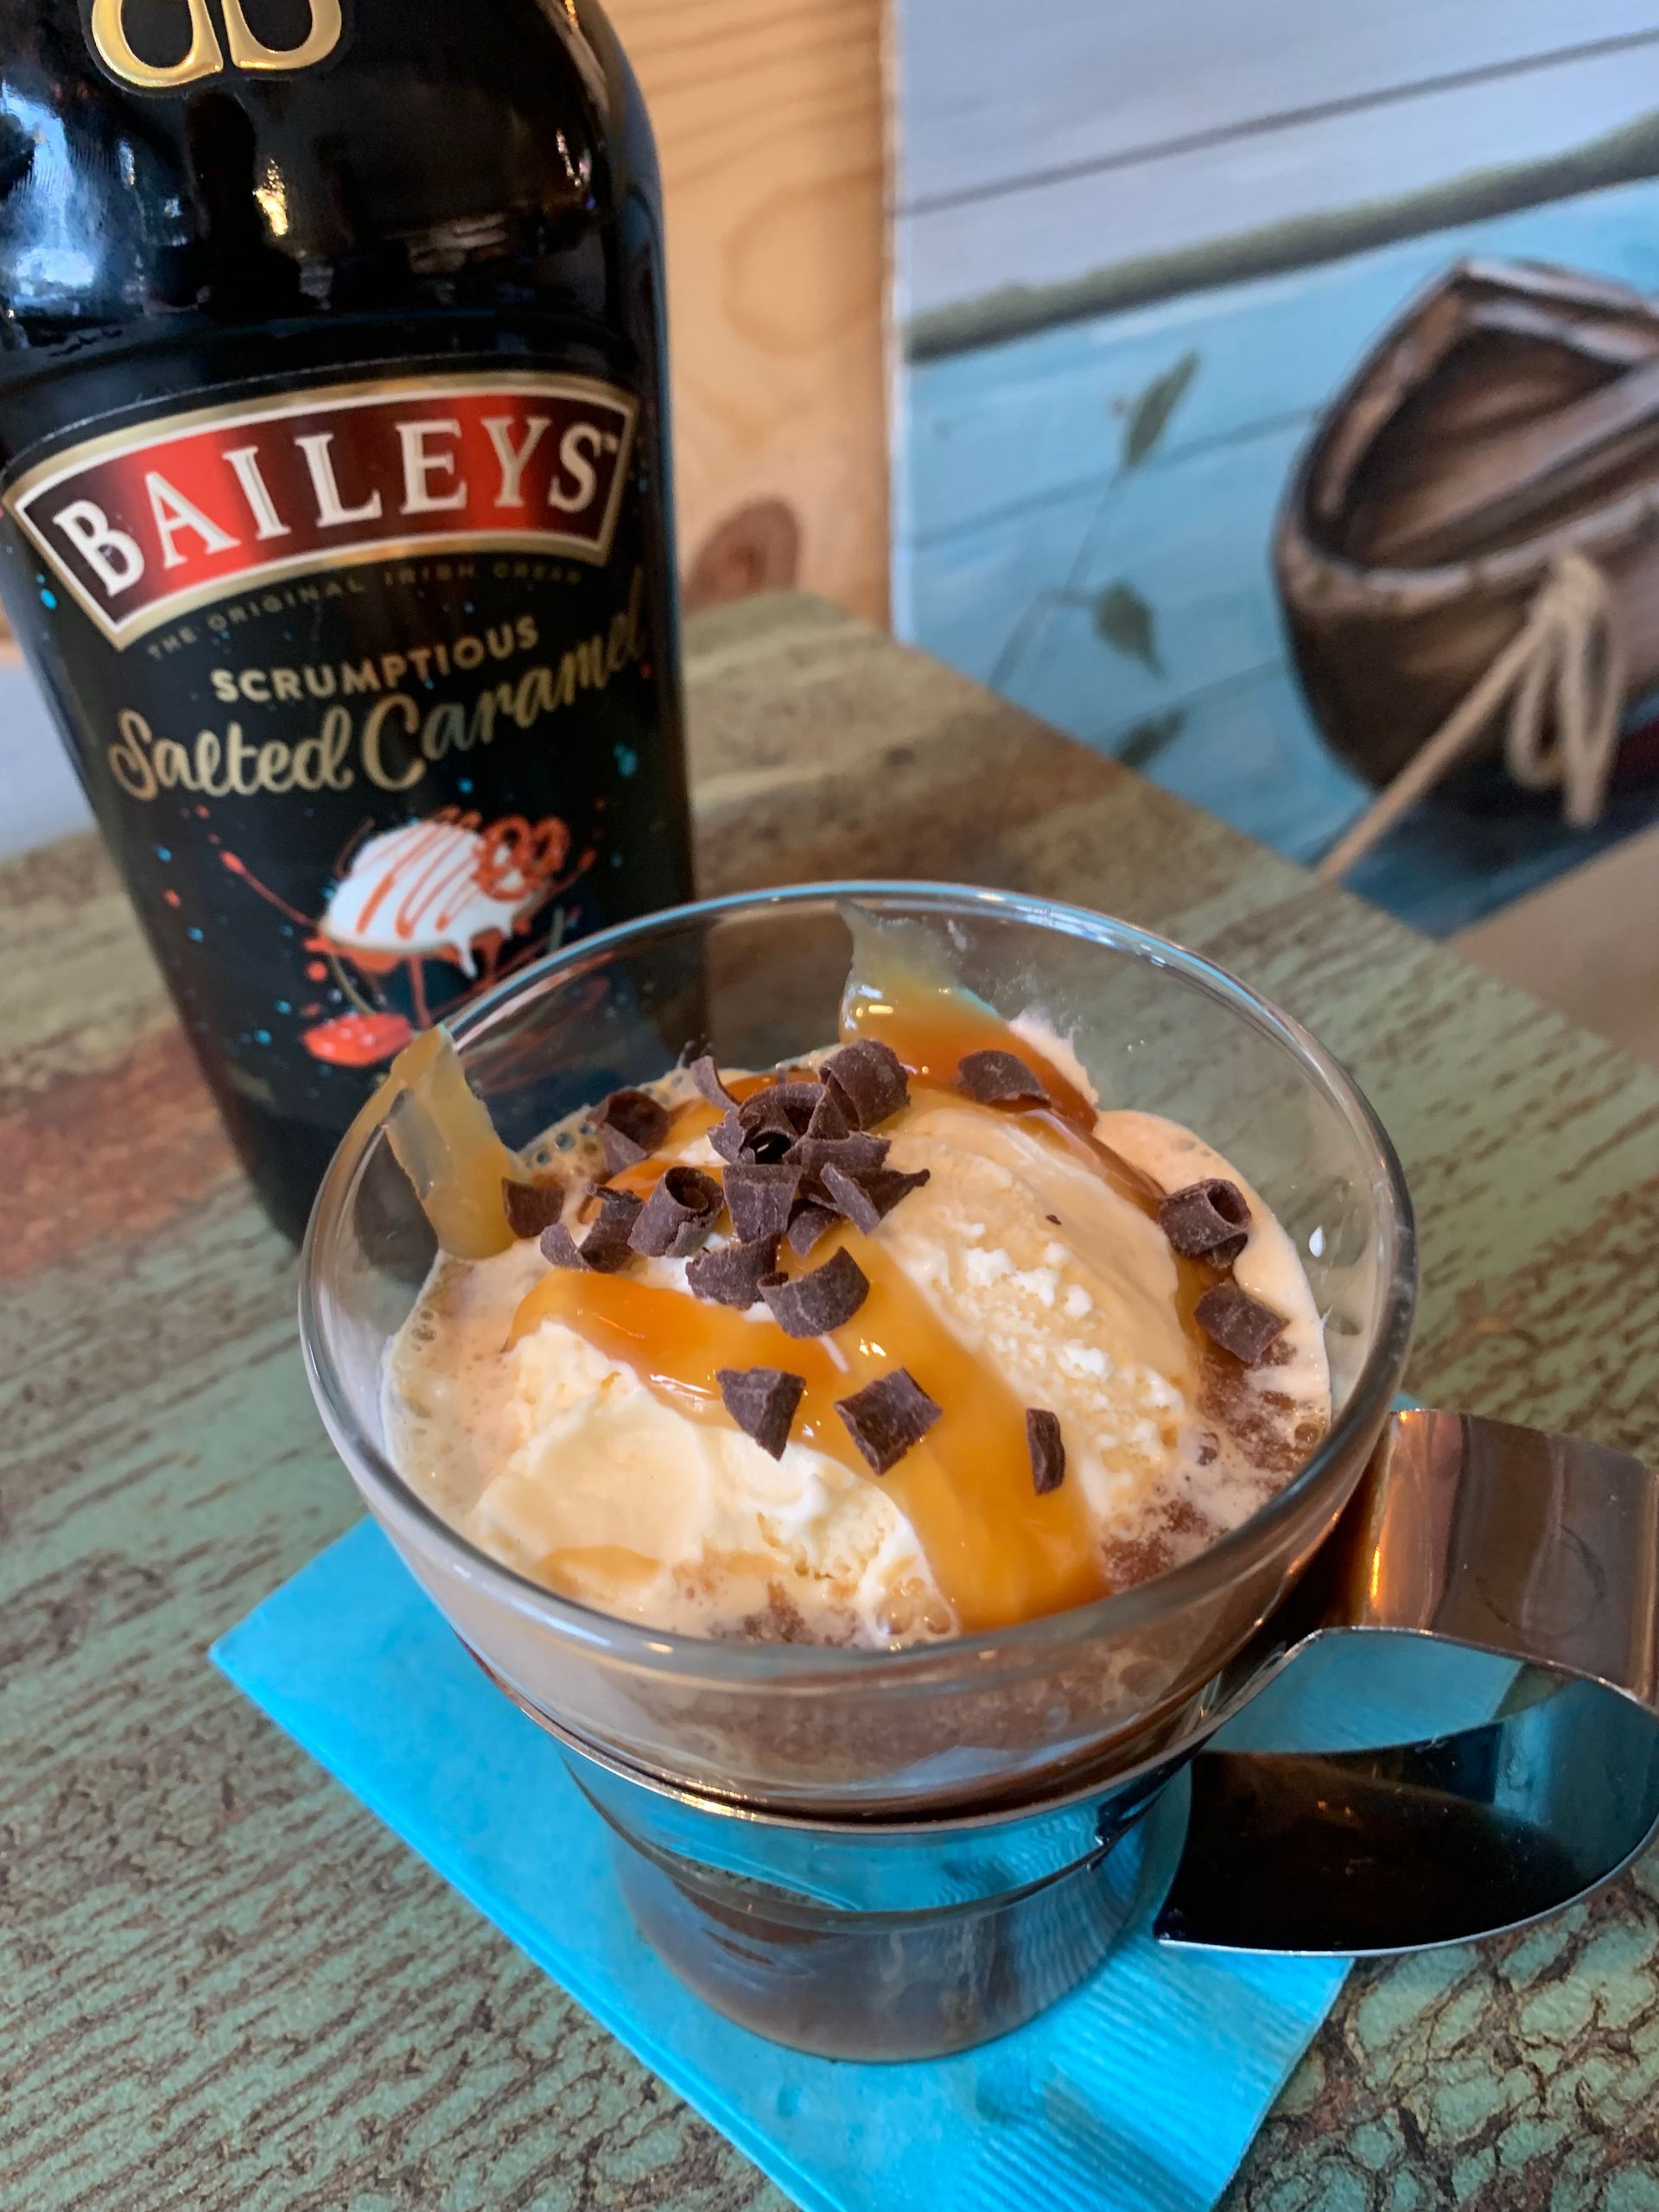 A bottle of baileys next to a glass of ice cream